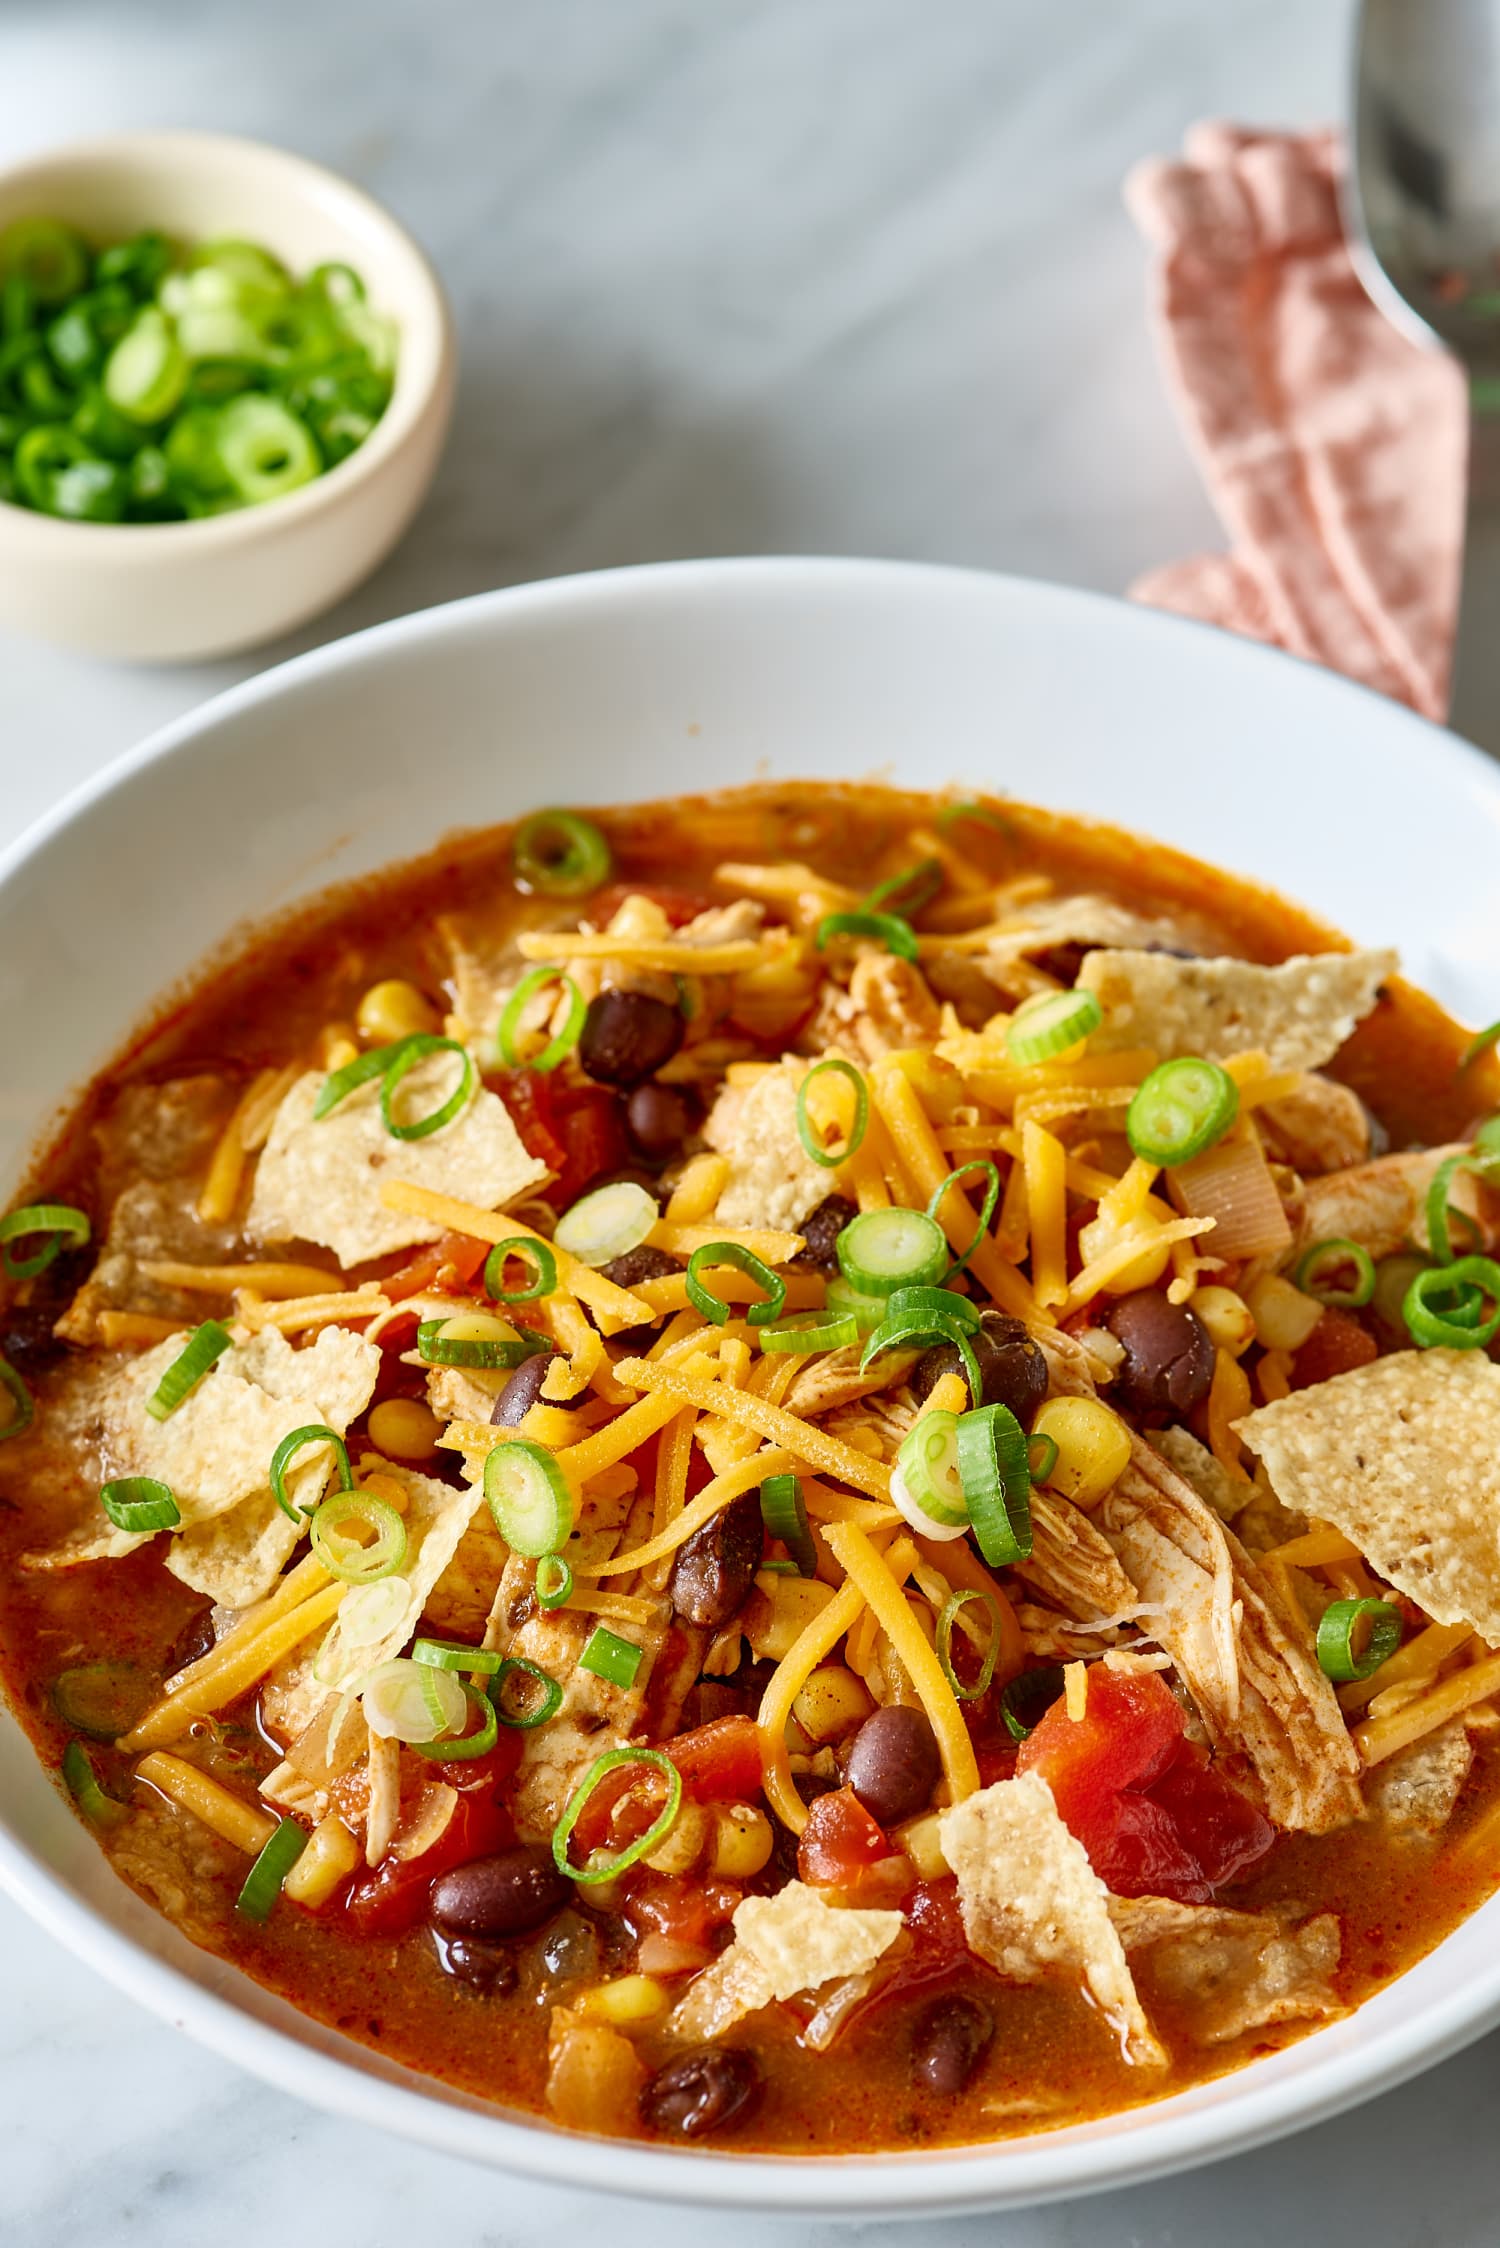 Chicken Taco Soup - The Easiest, Simplest Recipe | Kitchn